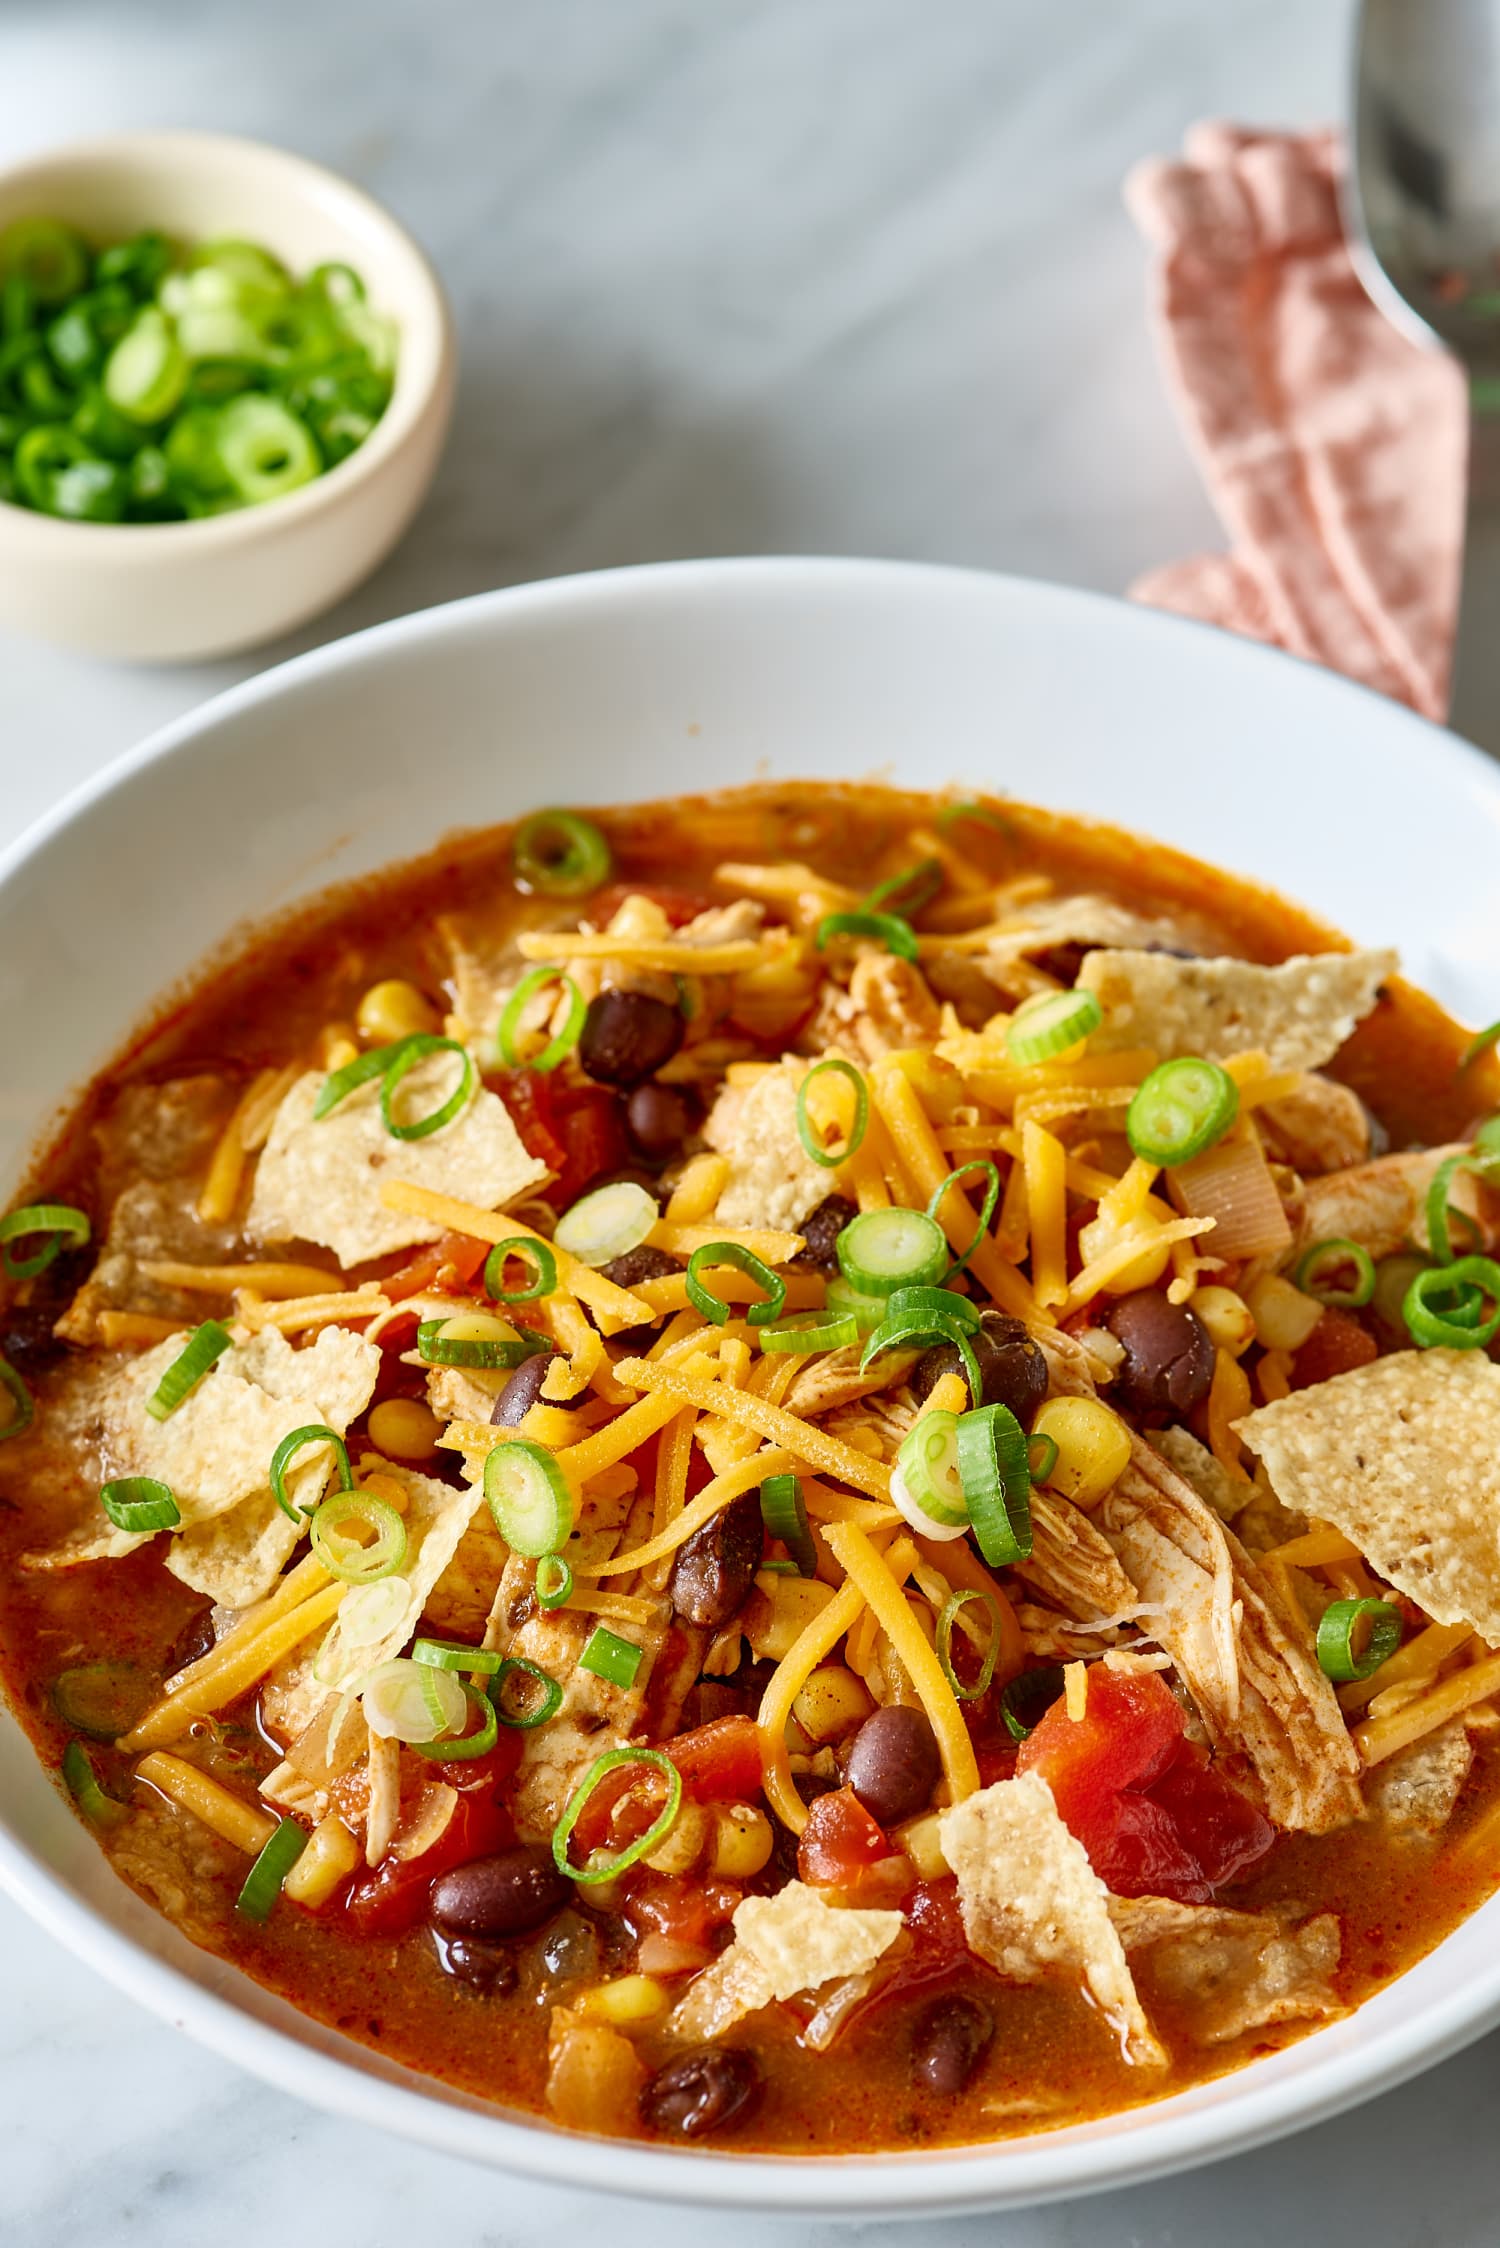 Chicken Taco Soup - The Easiest, Simplest Recipe | Kitchn